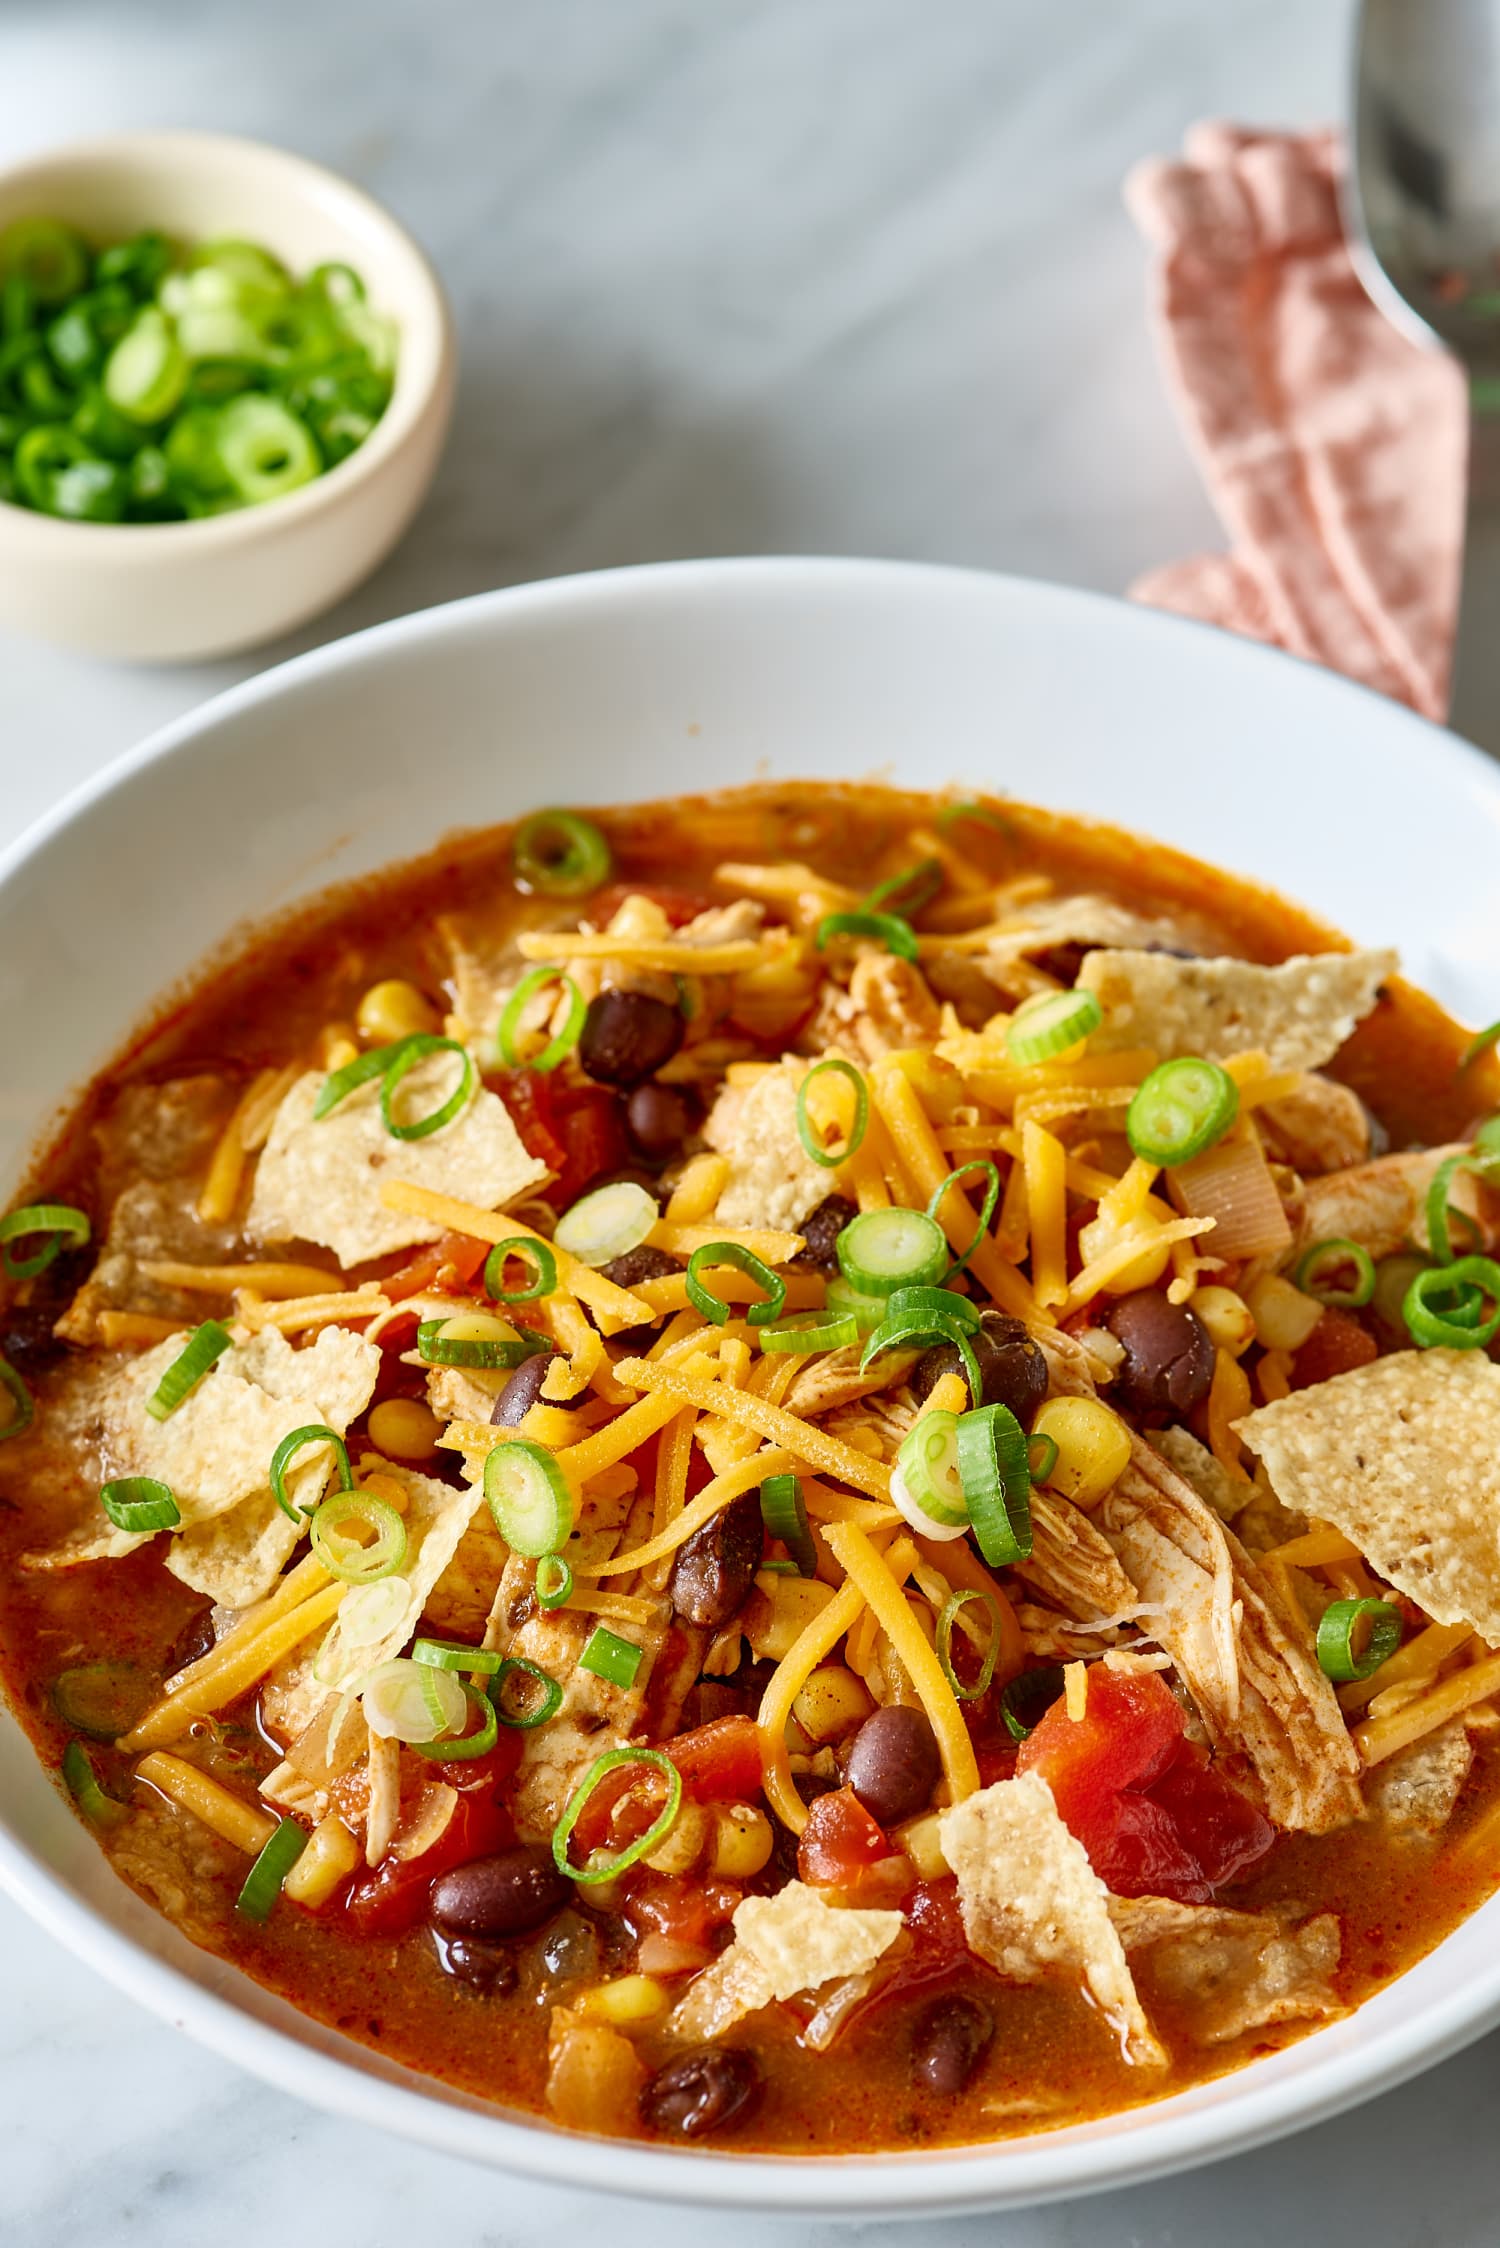 Chicken Taco Soup - The Easiest, Simplest Recipe | Kitchn